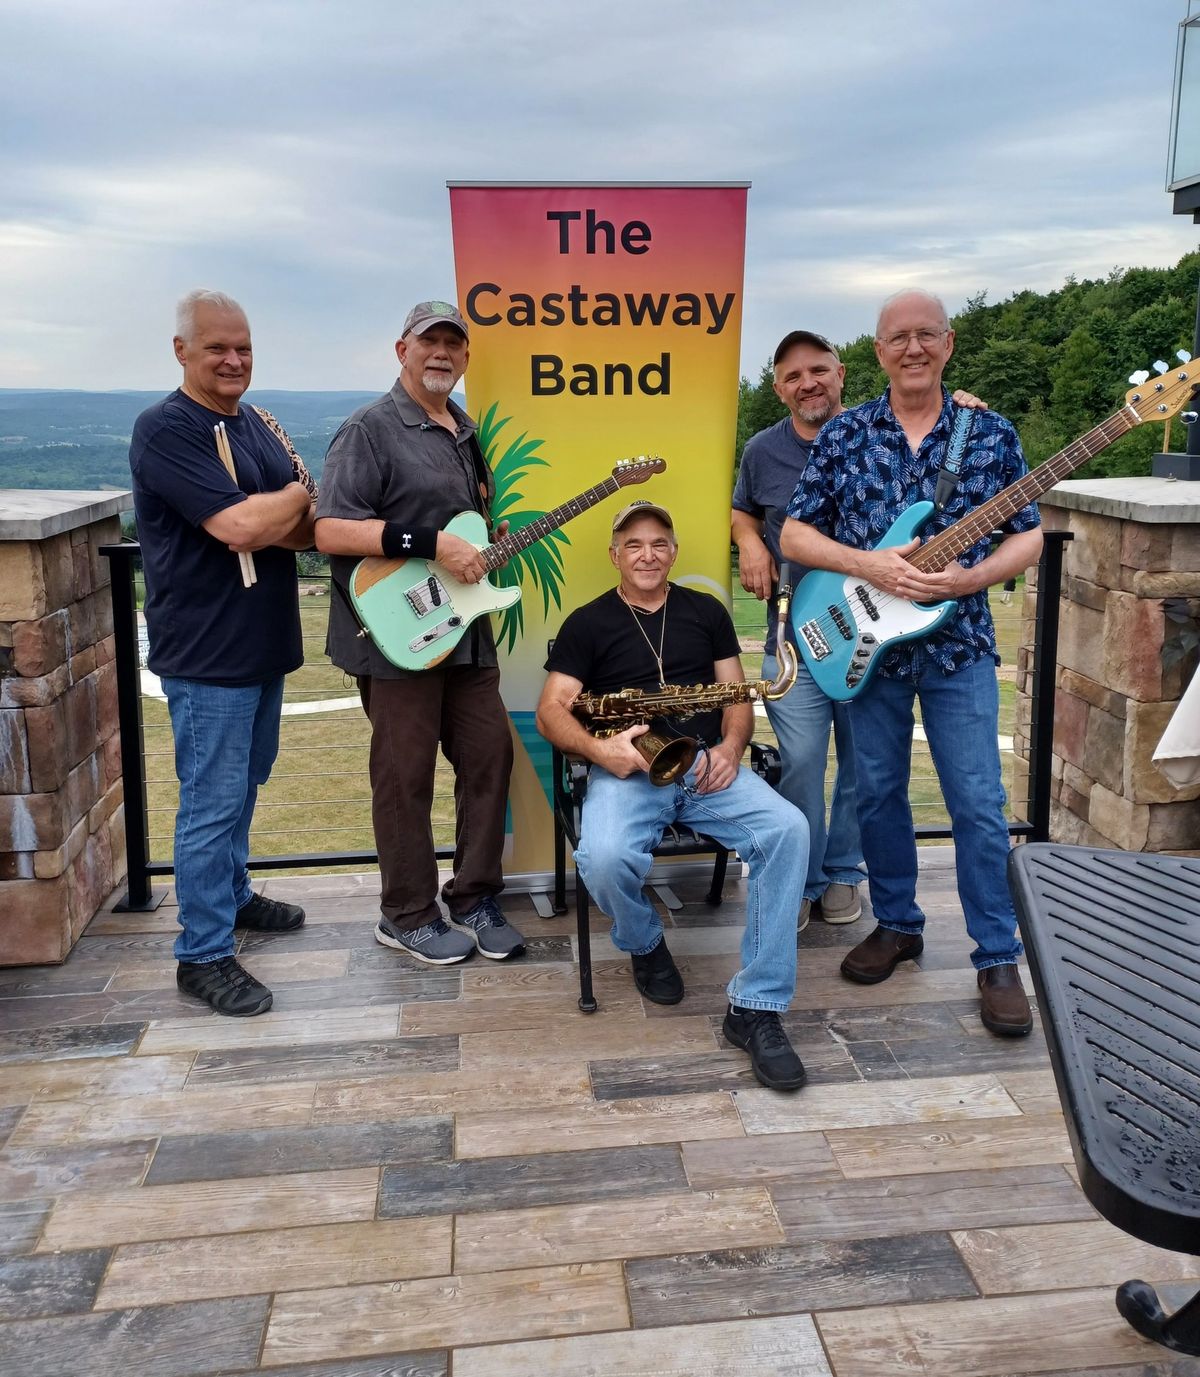 Concerts in the Park: The Castaway Band